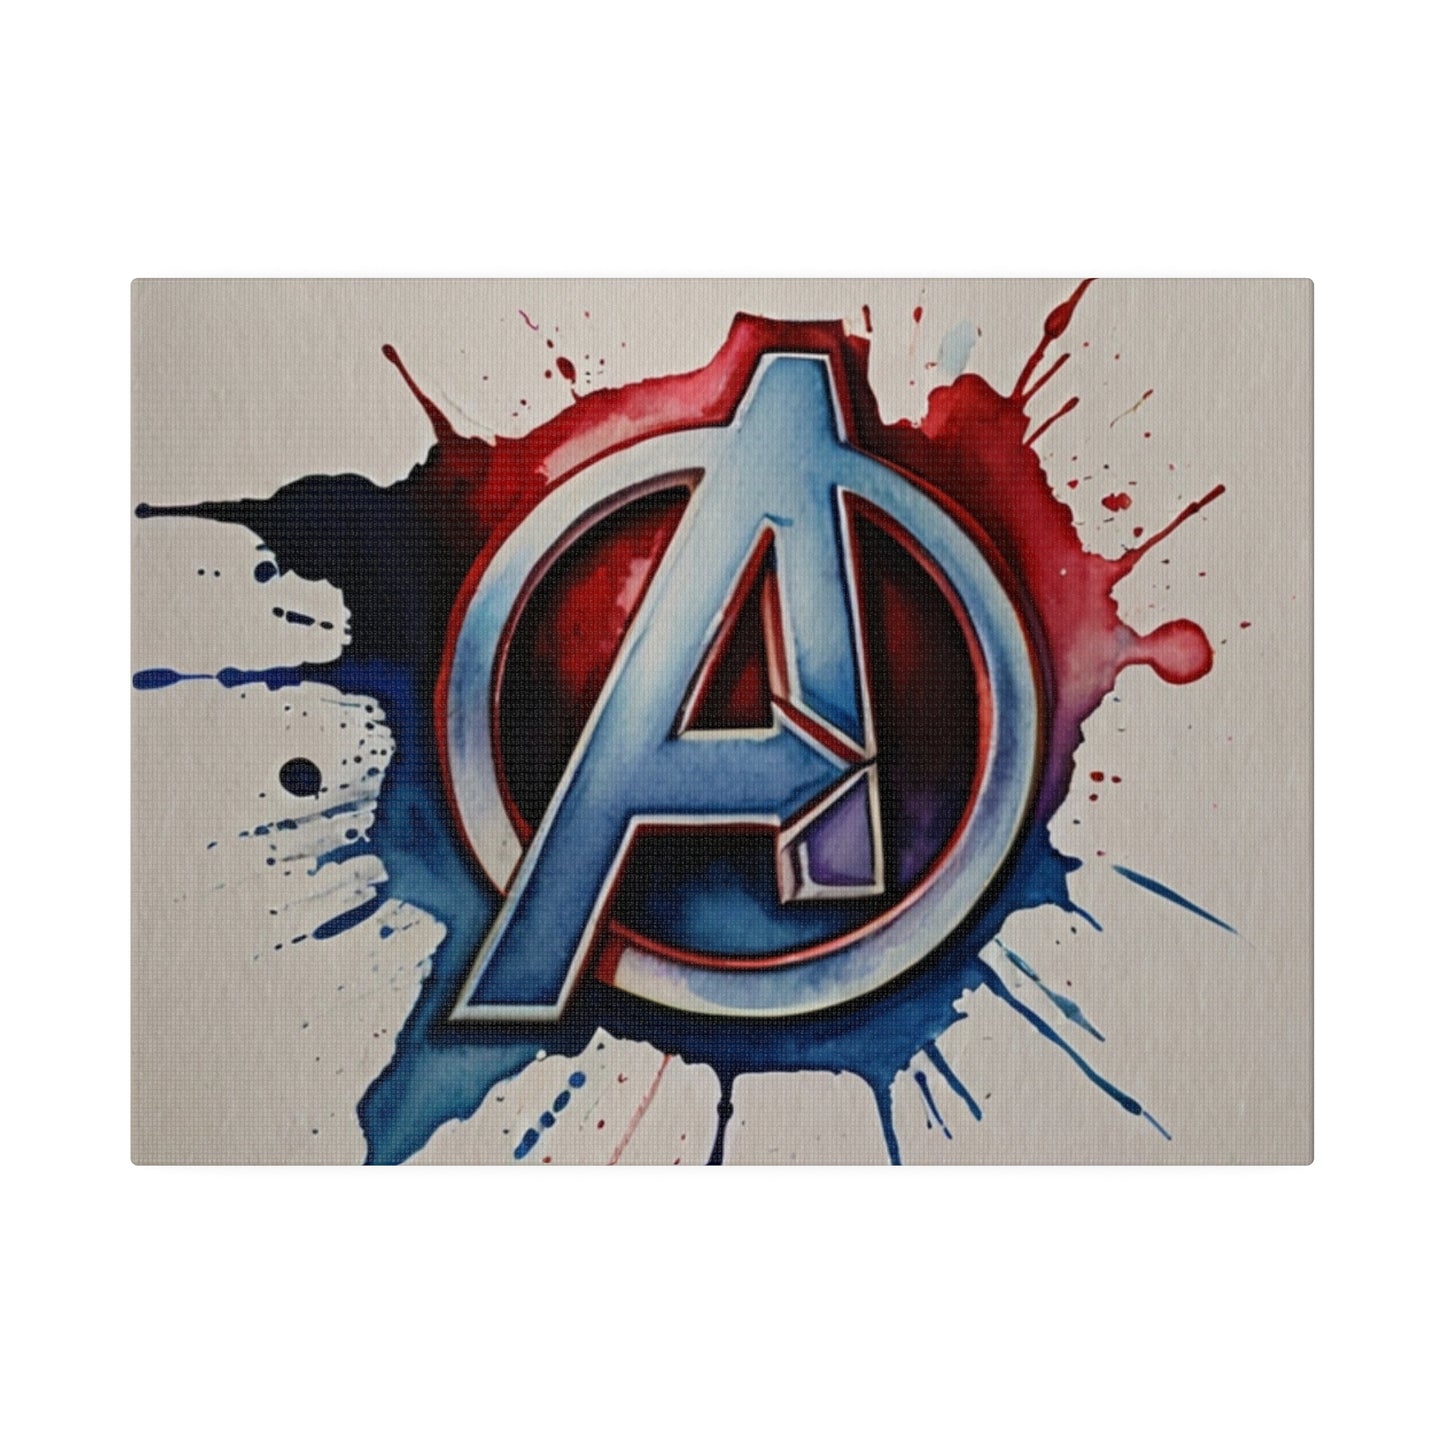 Red and White Avengers Logo Symbol Watercolour - Matte Canvas, Stretched, 0.75"